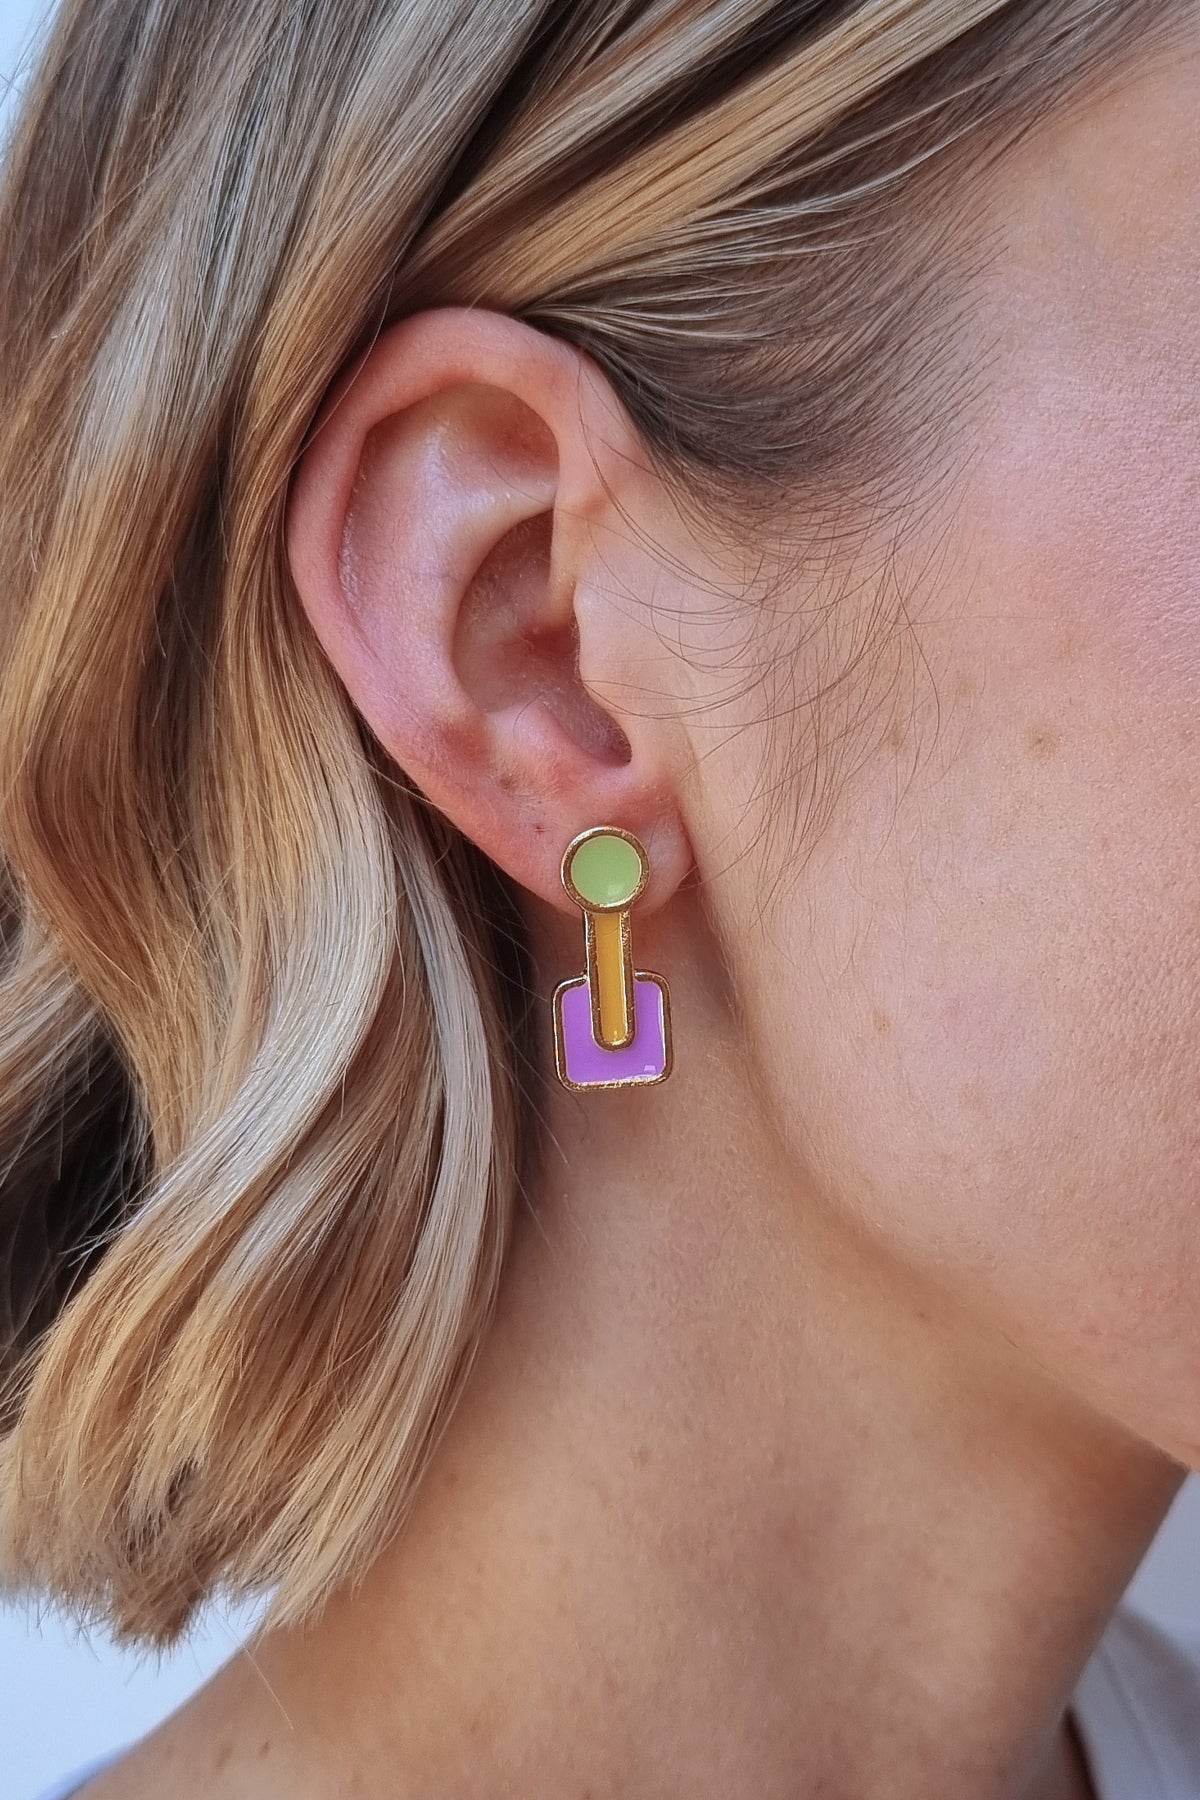 A close up sideview of a lady with blonde hair shows the Joystick earring in violet.